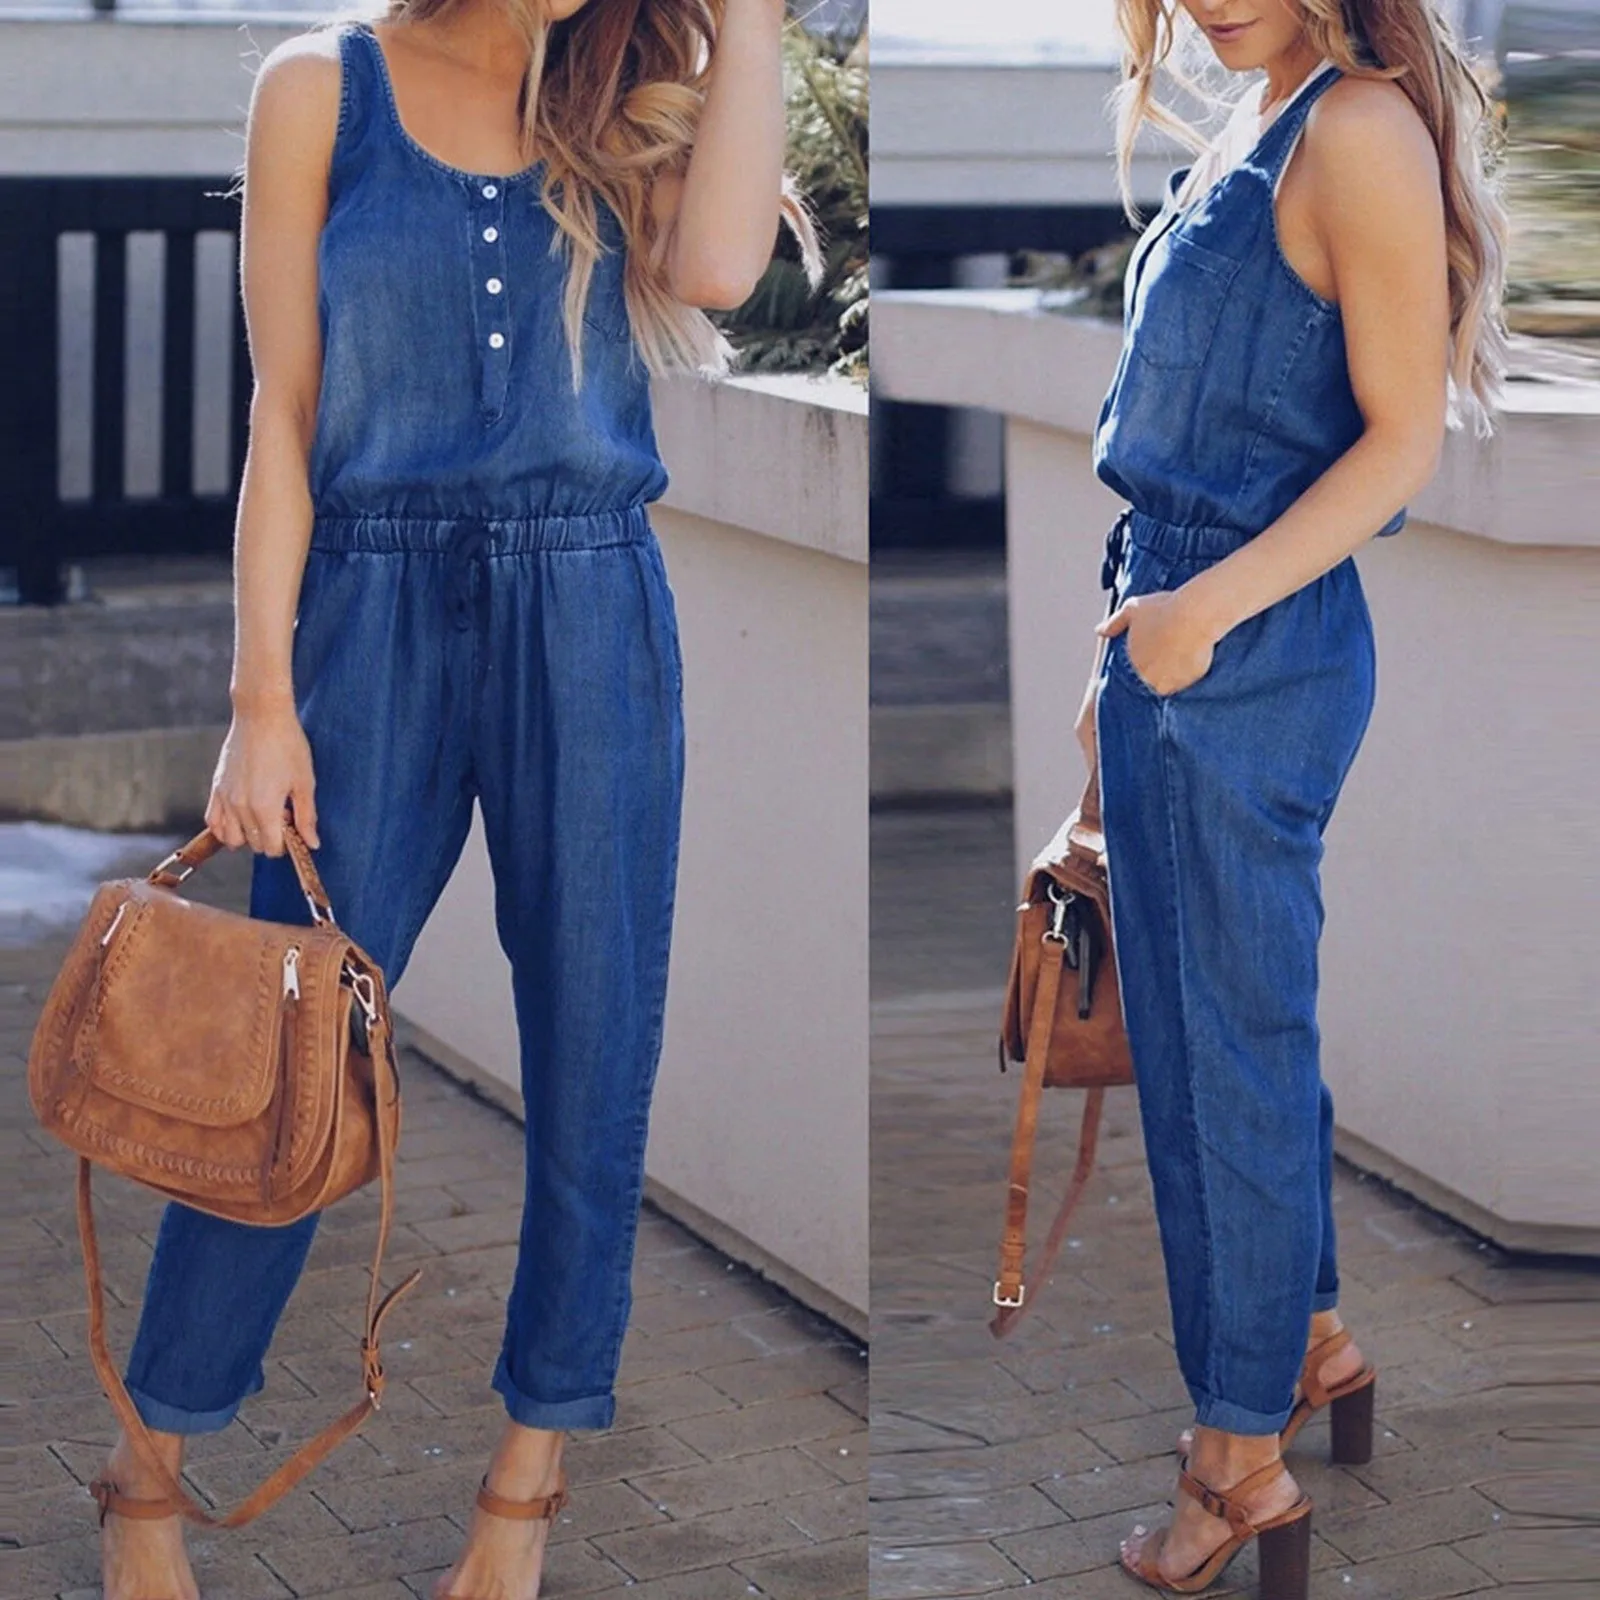 Women-Casual-Sleeveless-Tank-Jumpsuit-Demin-Jeans-Beach-Strappy-Button-Rompers-With-Pockets-Jumpsuit-Bodysuit-Long-1